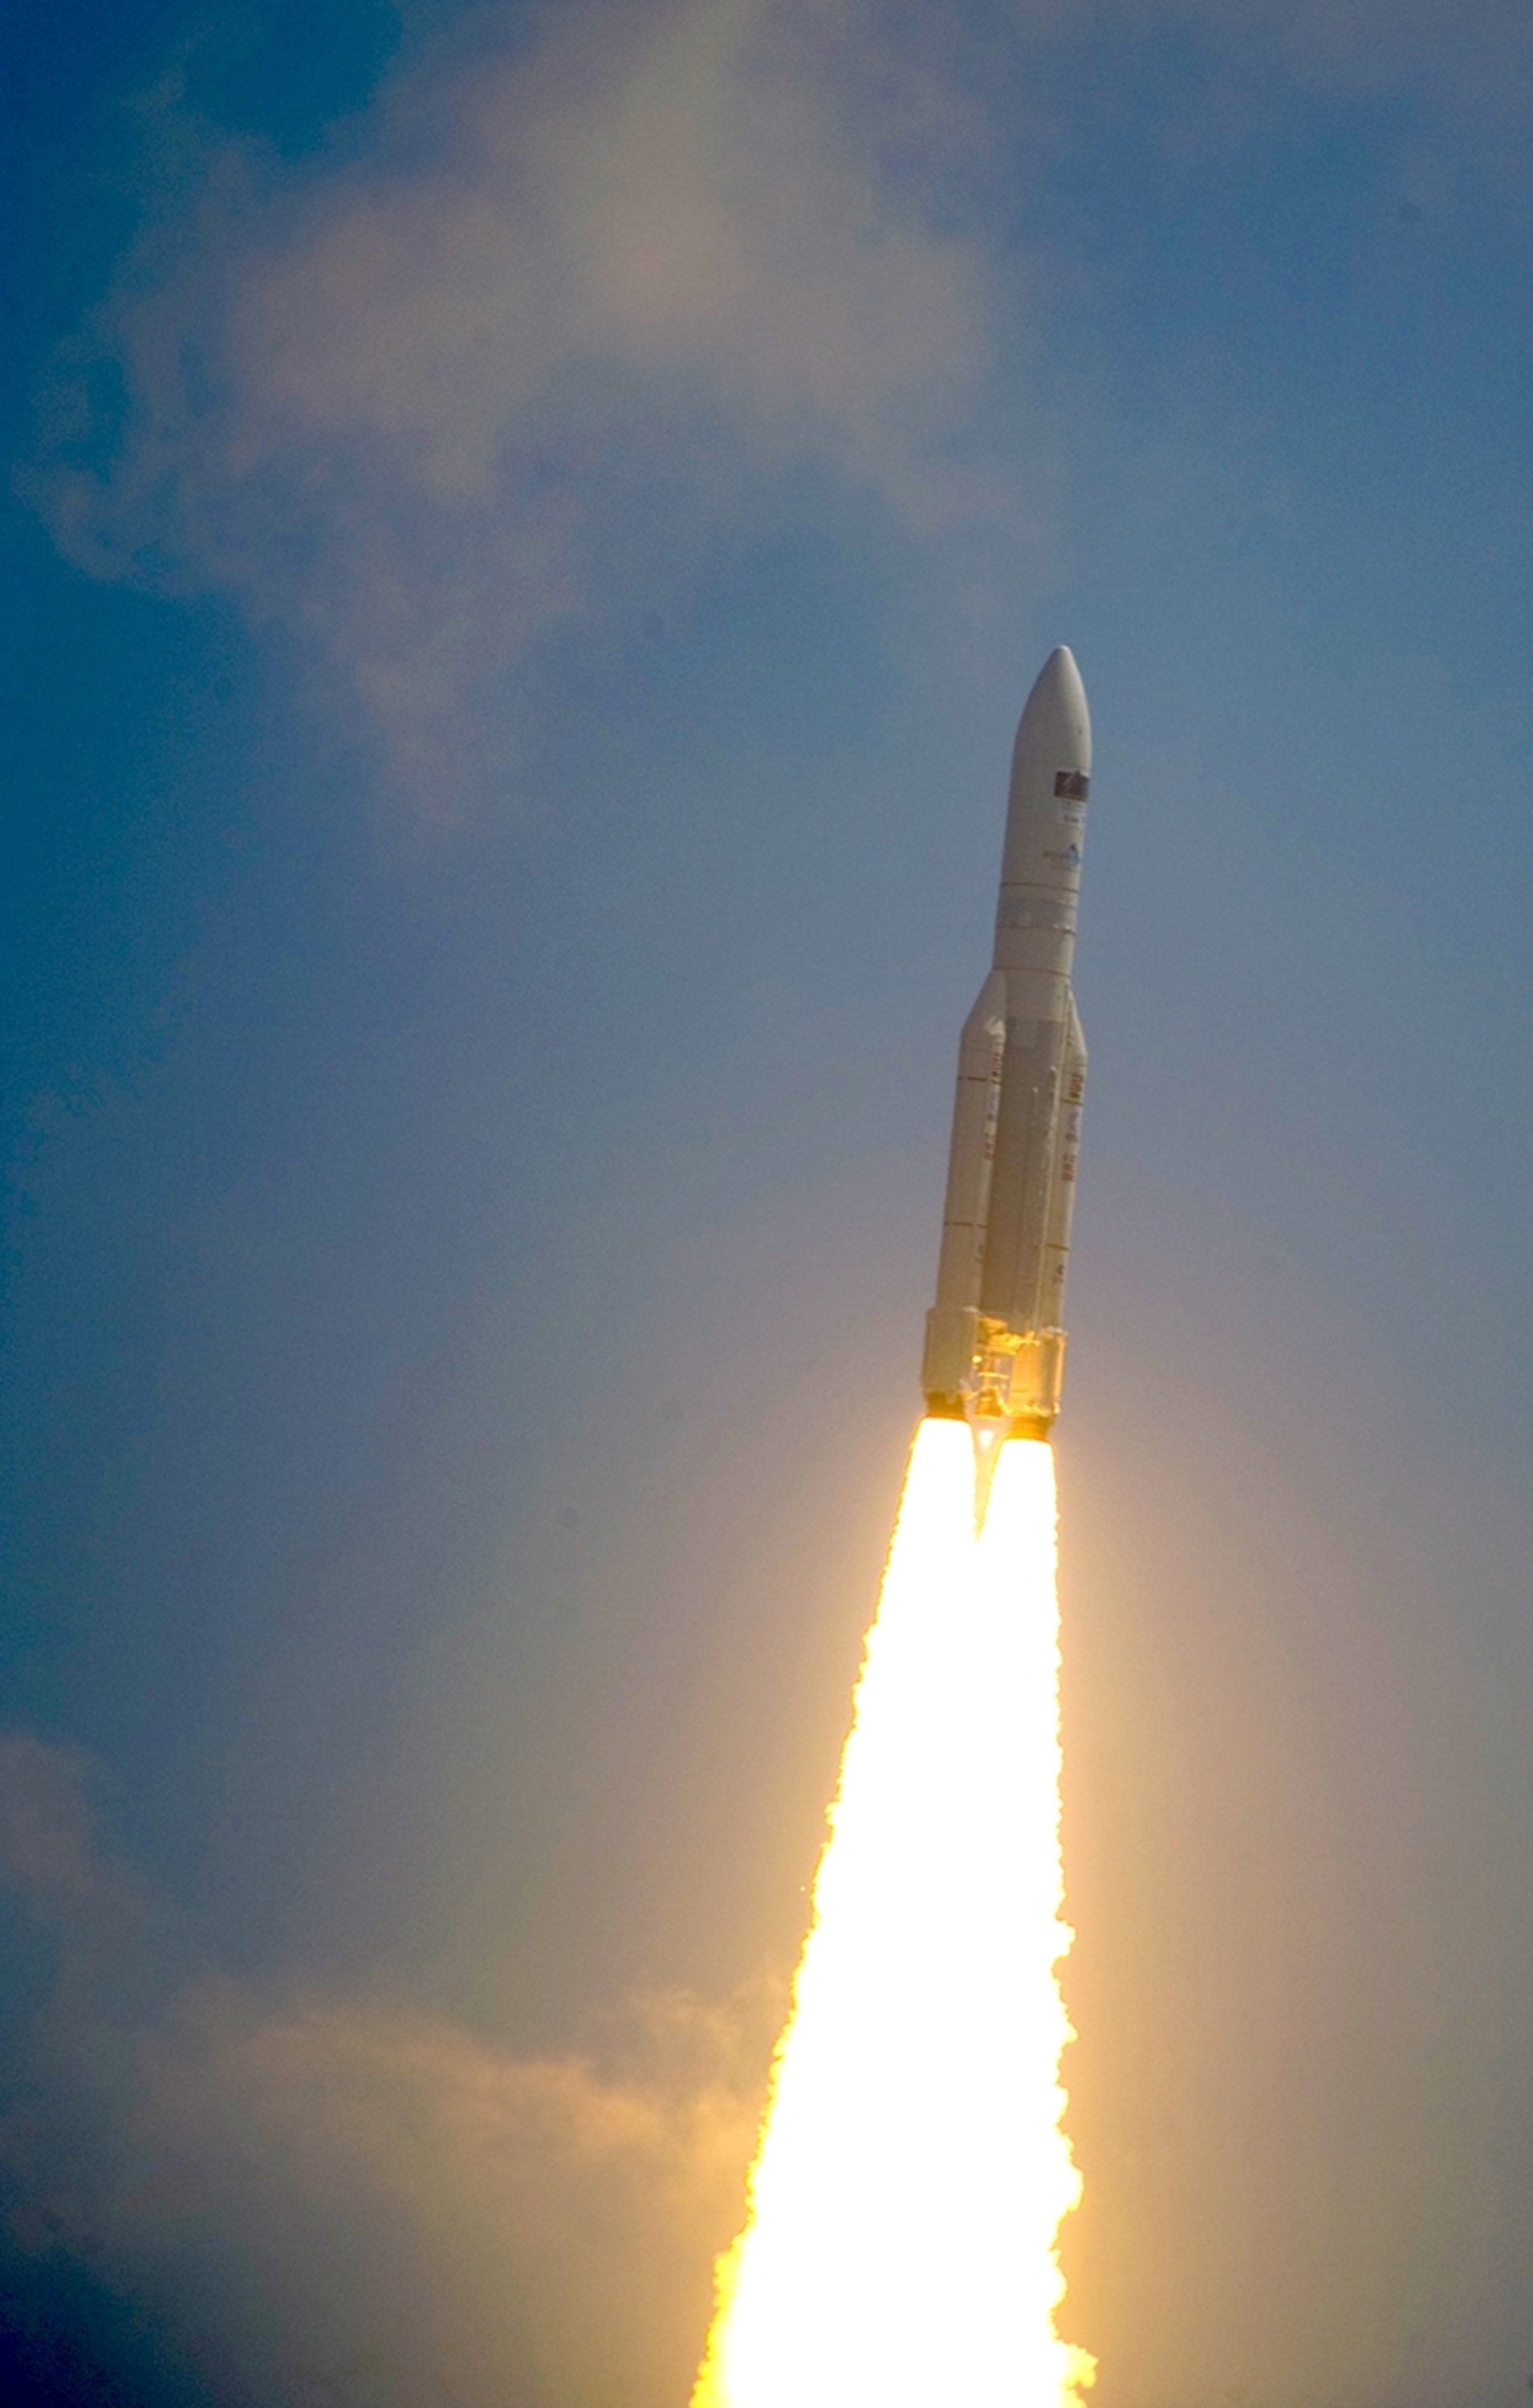 Ariane 5 ECA V188 lifts off with Herschel and Planck esa europe space wallpaperx3000